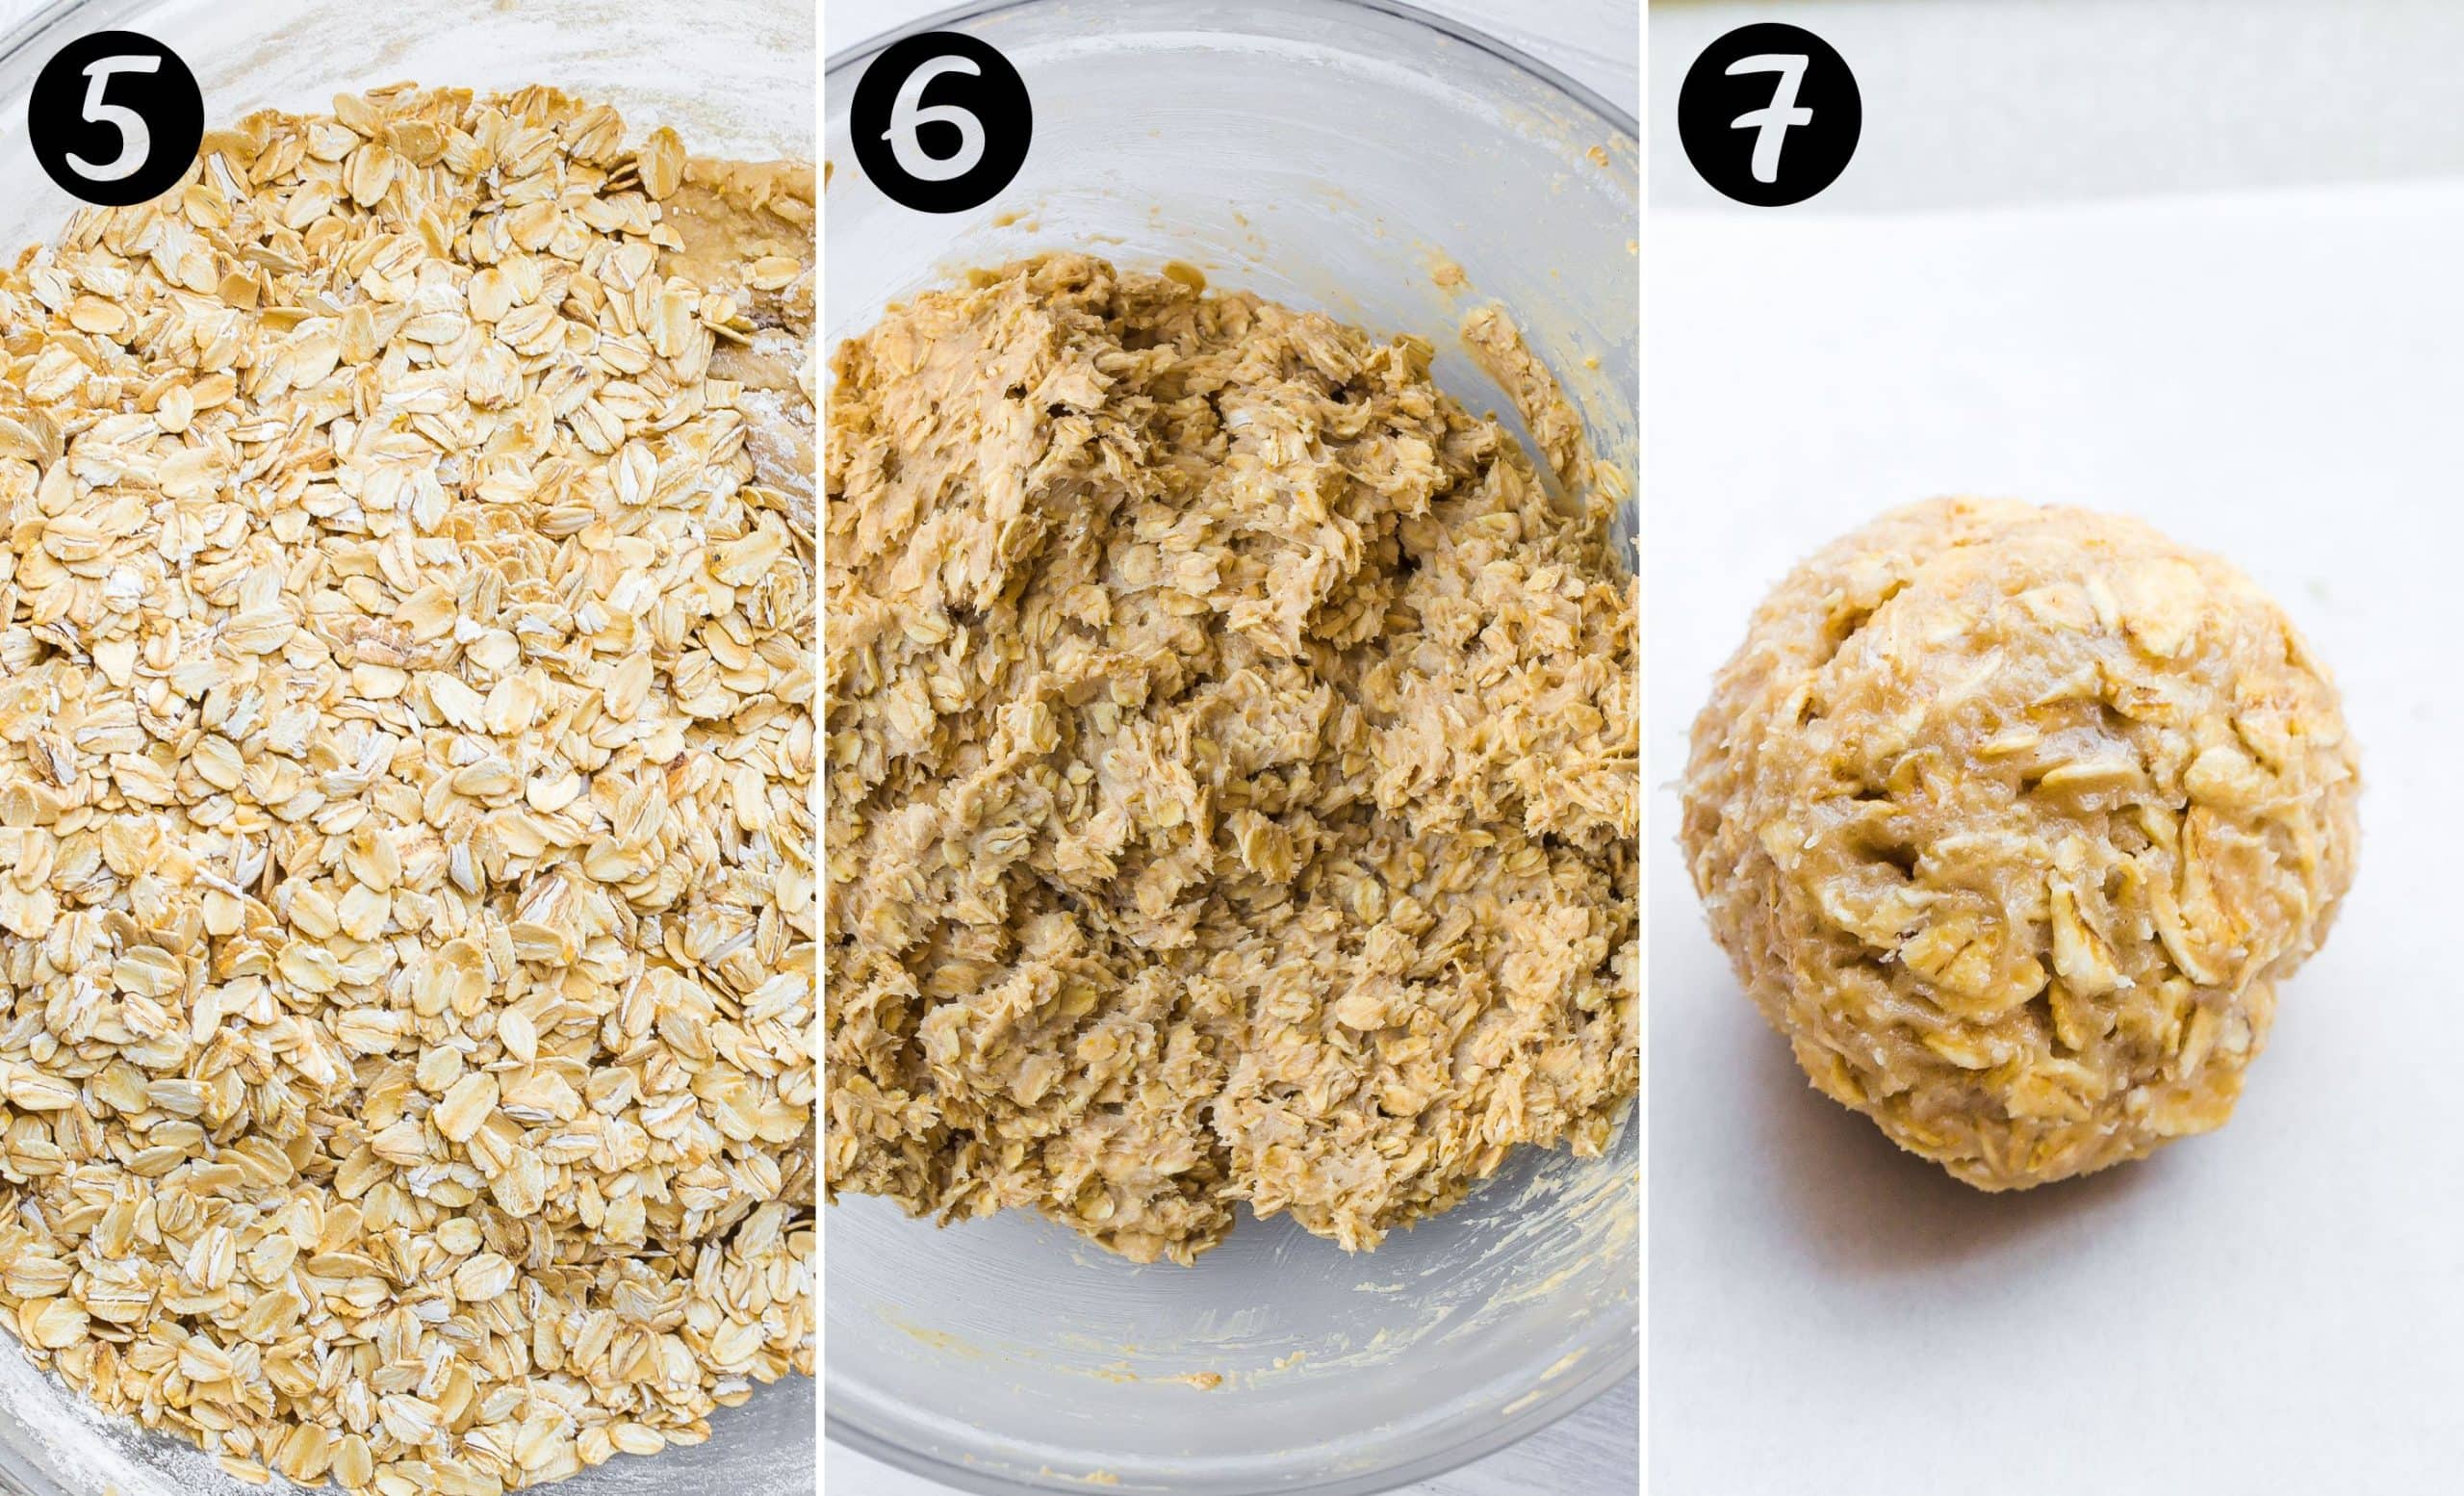 The Ultimate Oatmeal Cookie dough step by step.